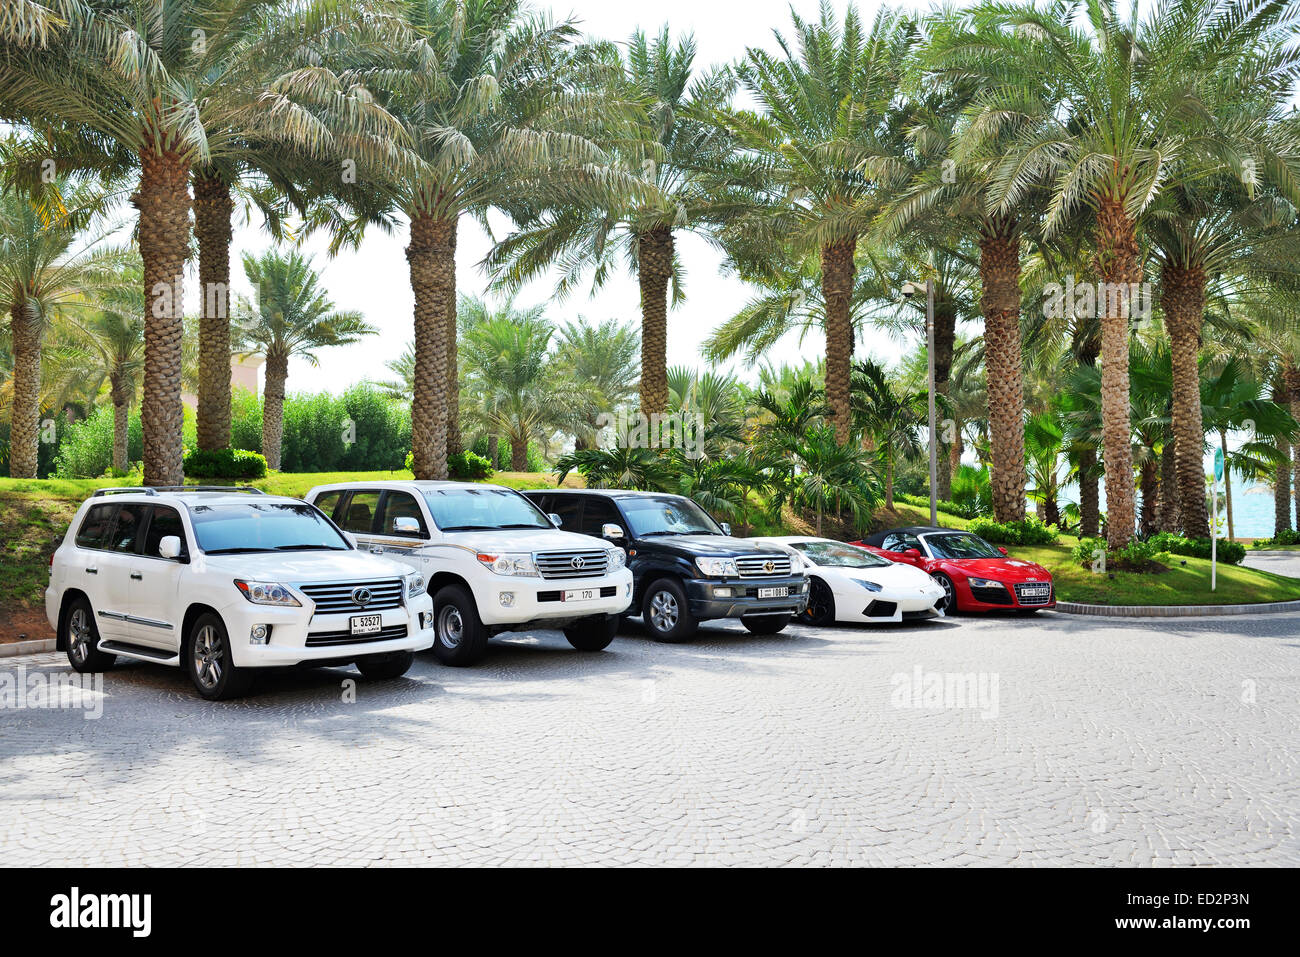 The Atlantis the Palm hotel and luxury off-road cars. It is located on man-made island Palm Jumeirah Stock Photo